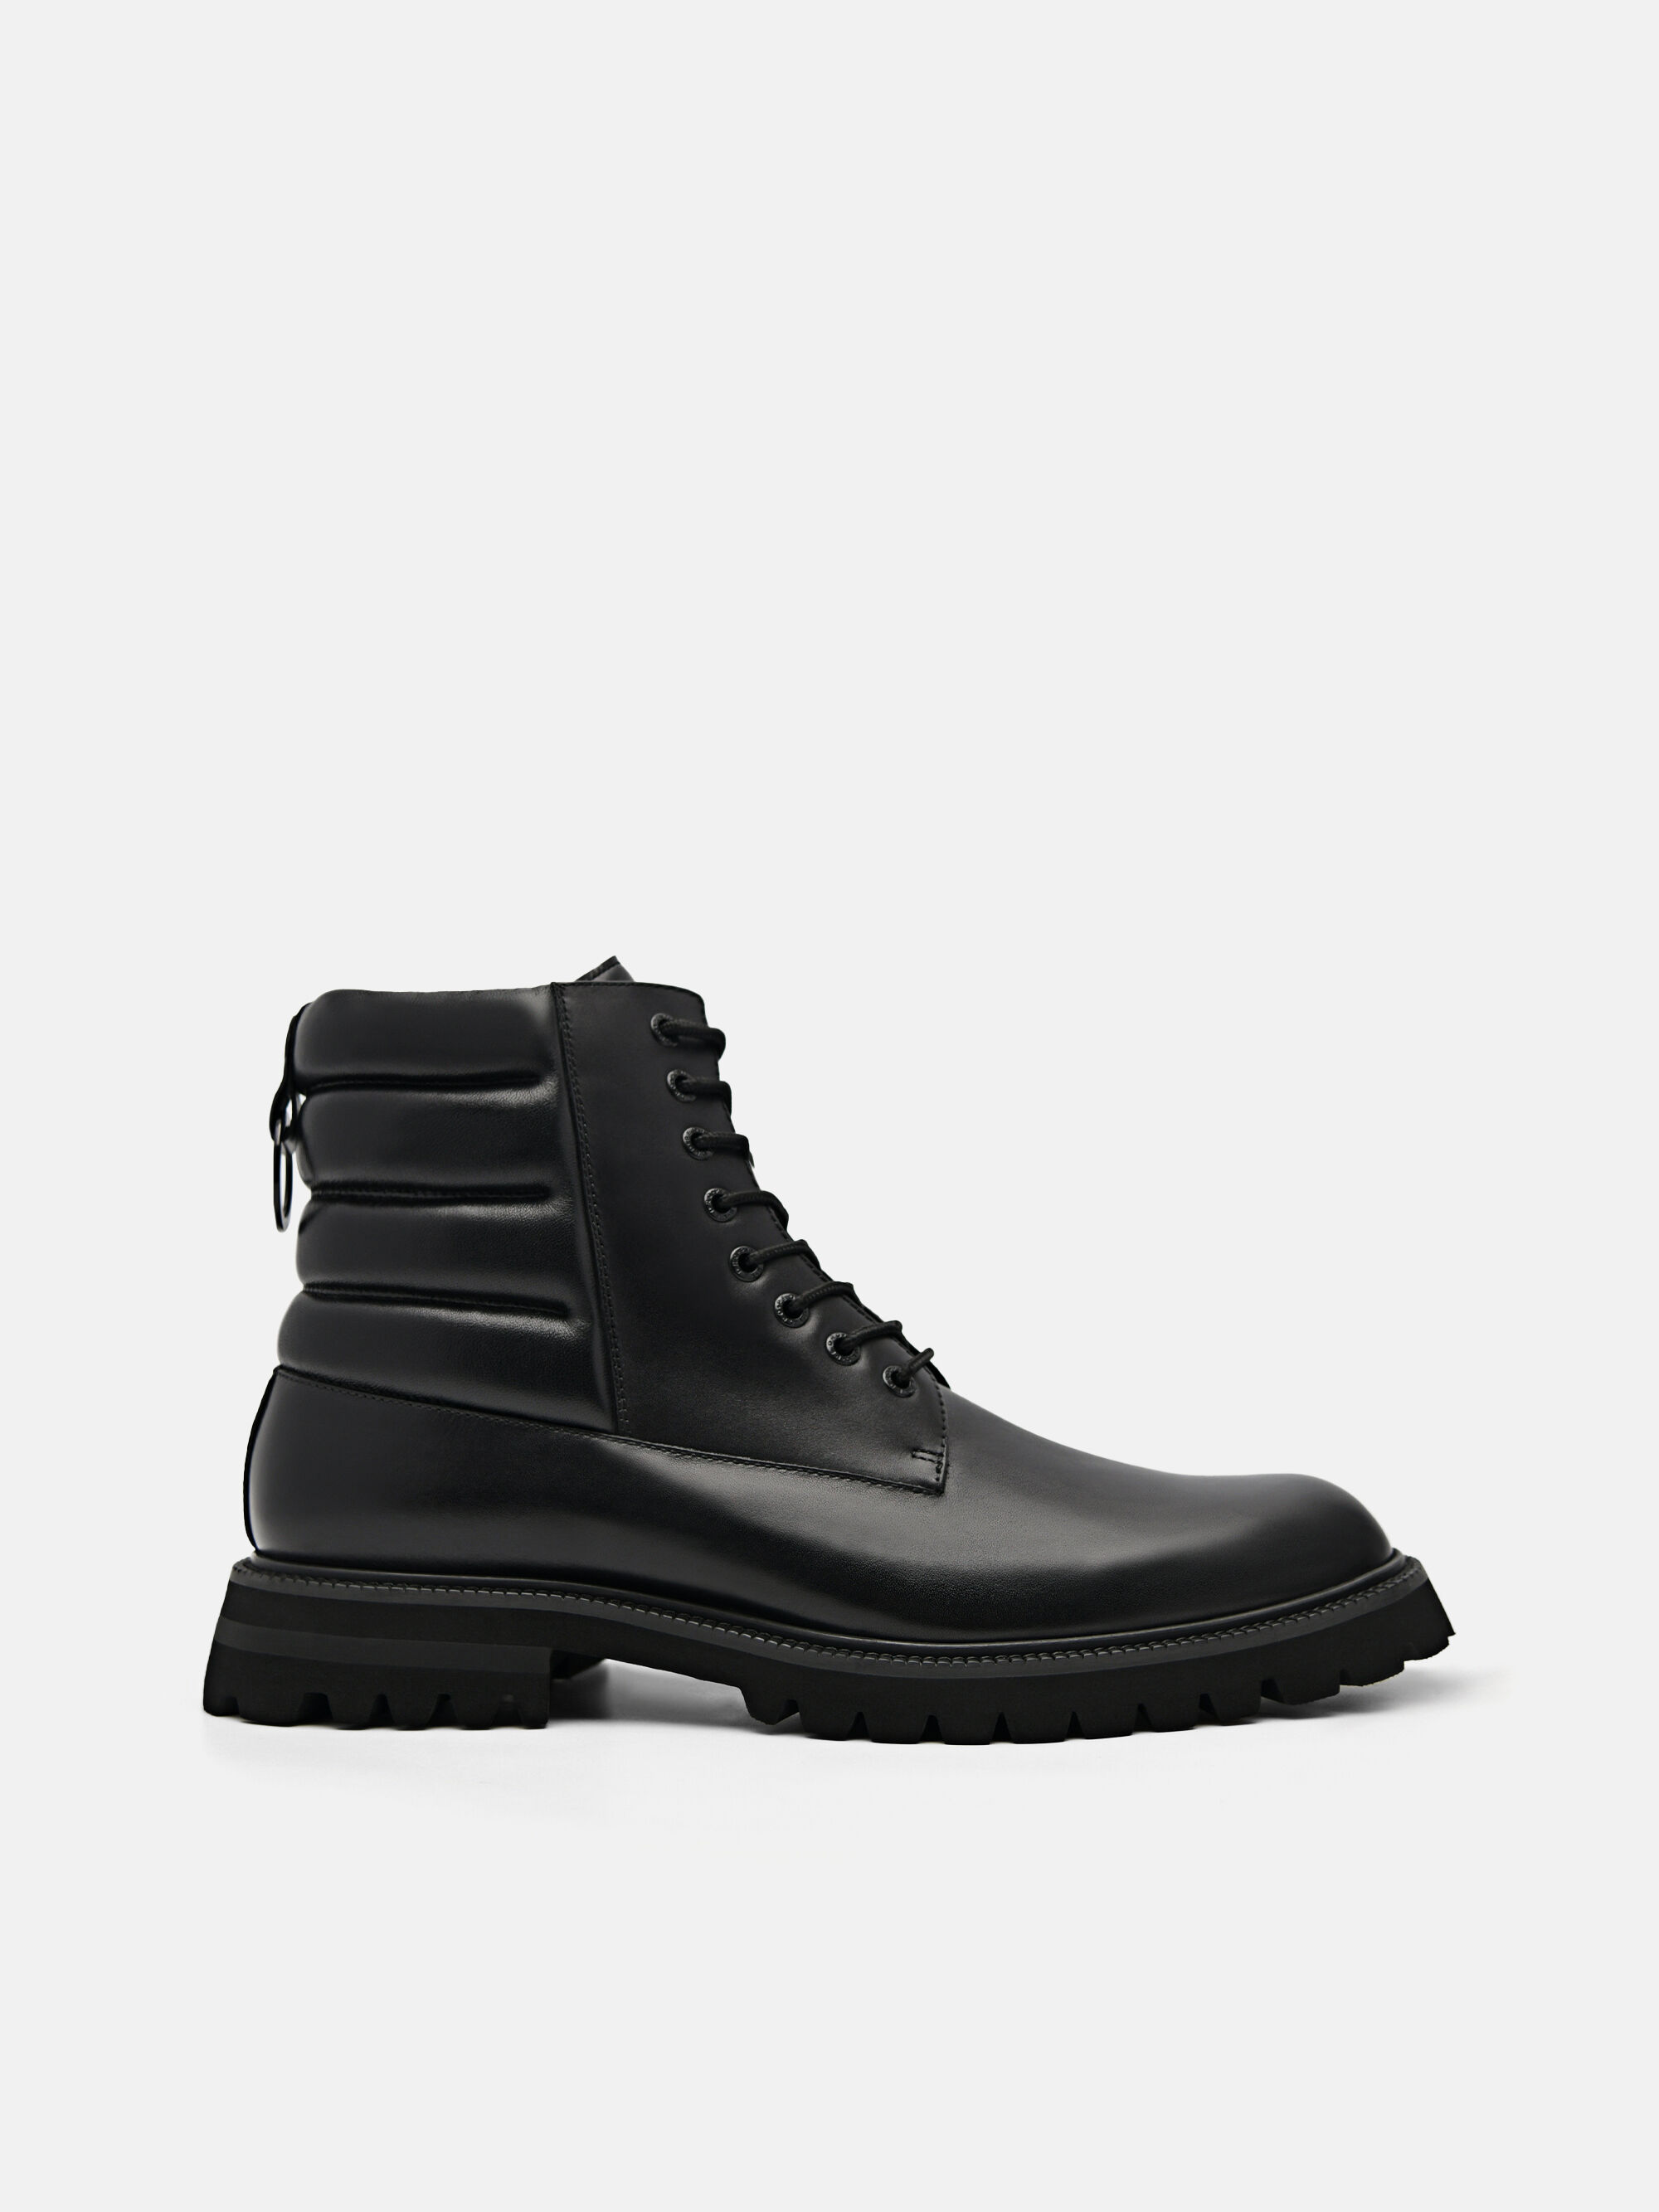 Jay Leather Boots, Black